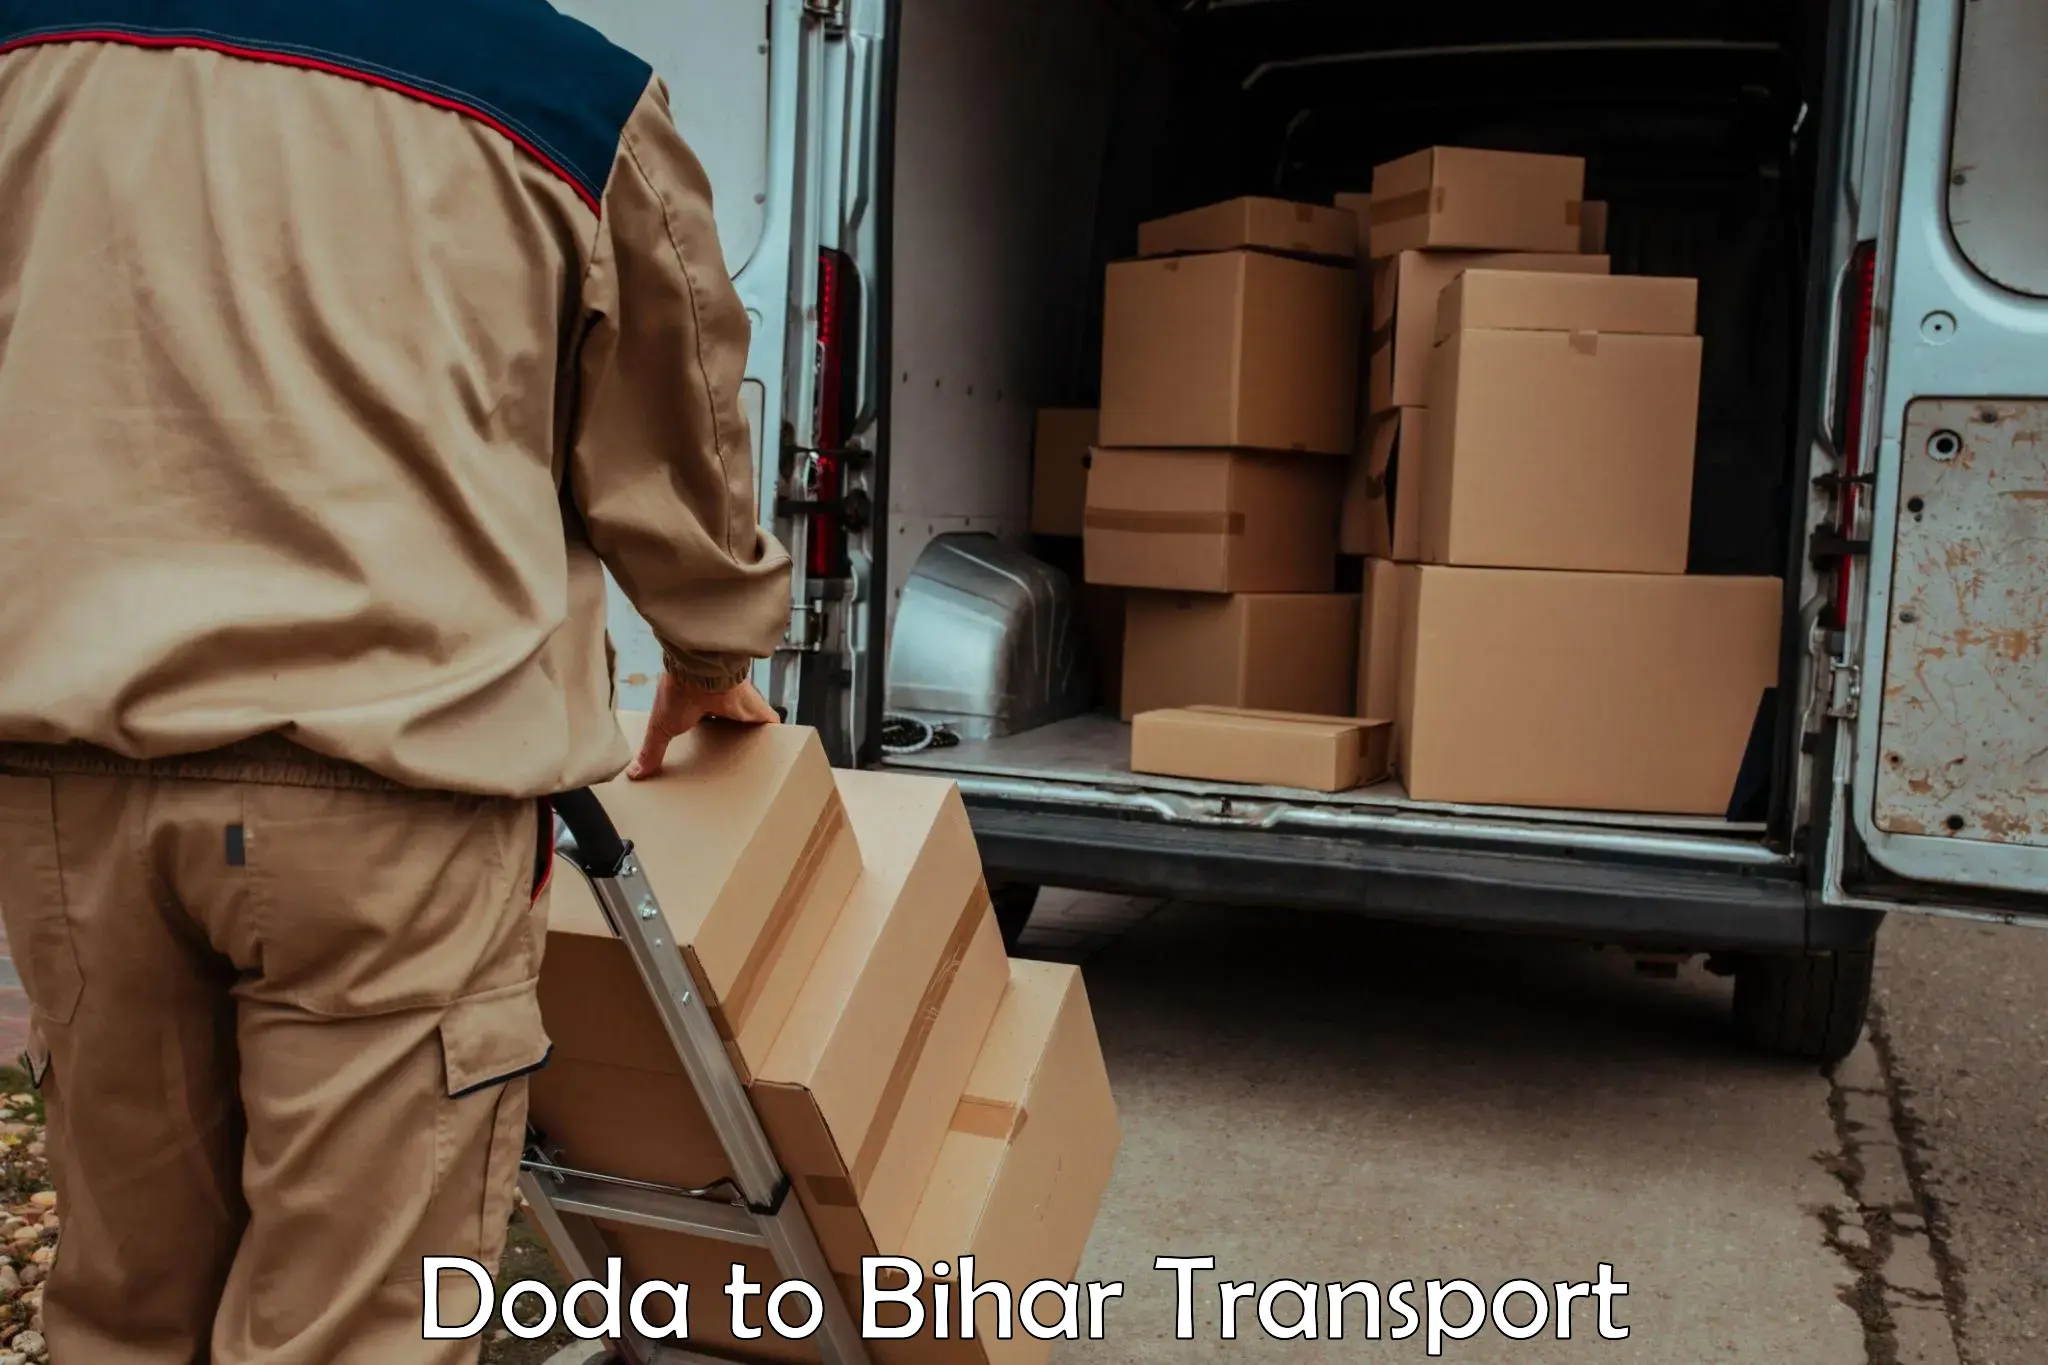 Part load transport service in India Doda to Punsia